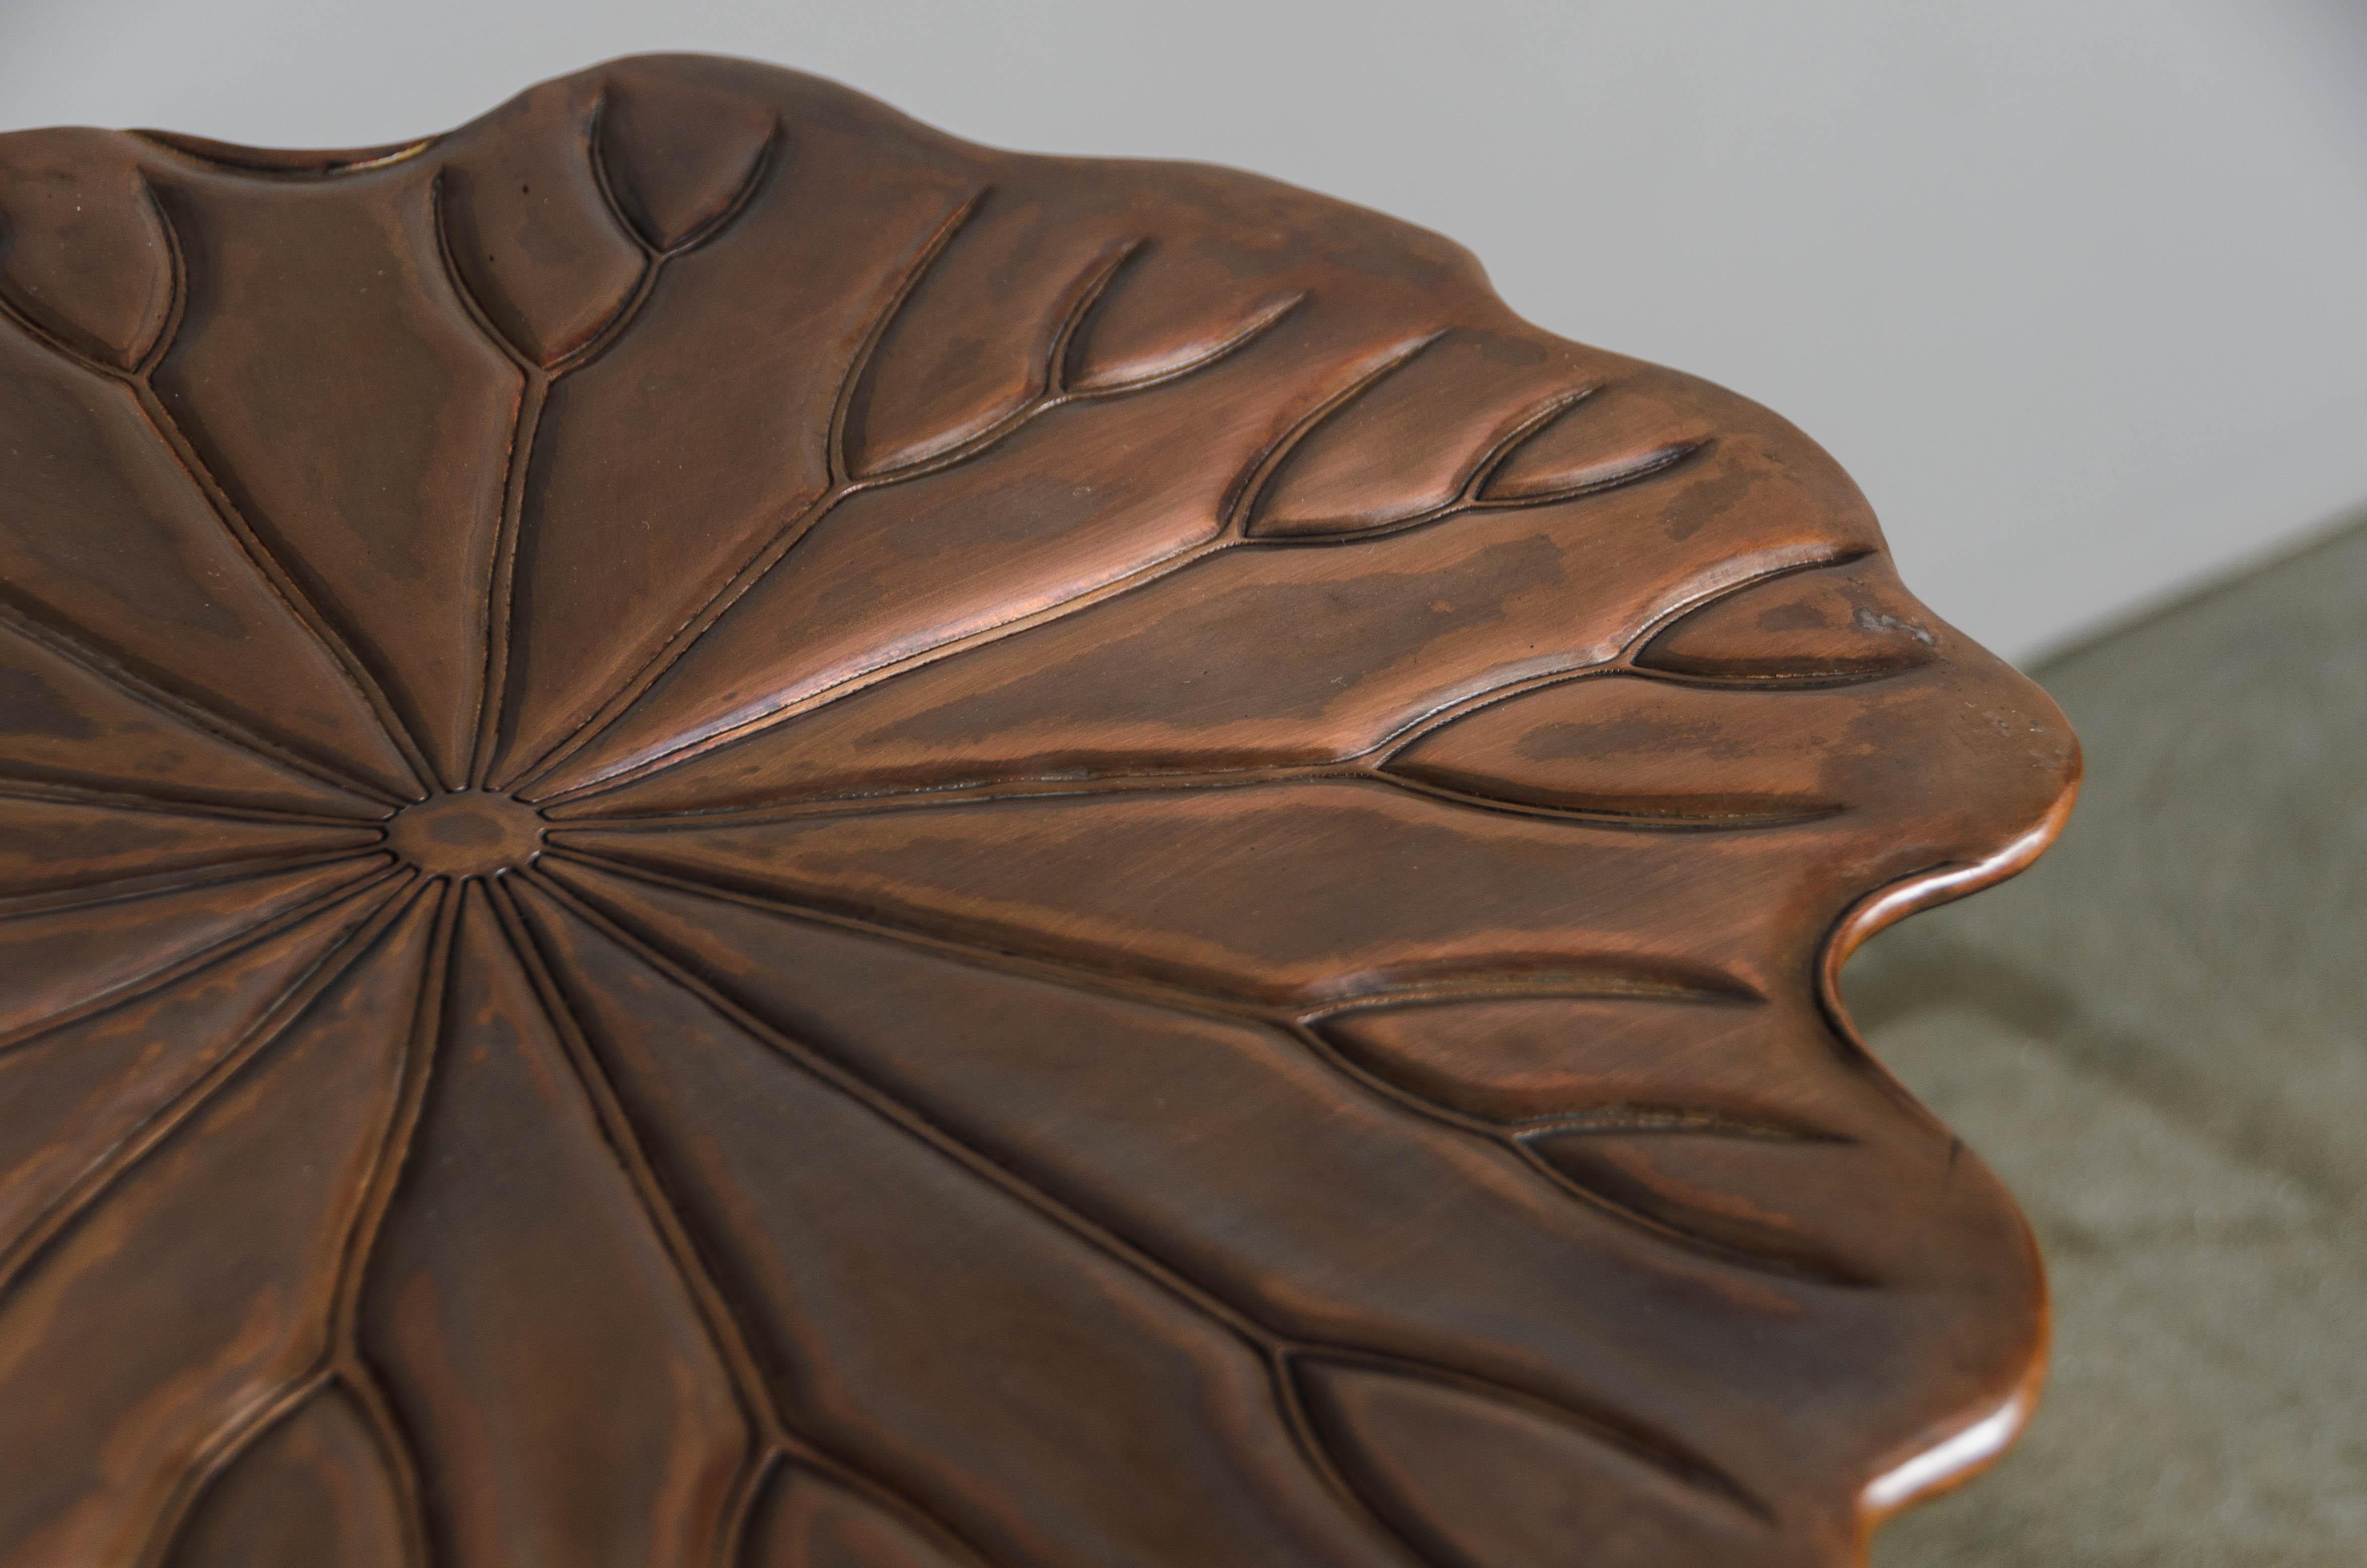 Water Lily Table in Antique Copper by Robert Kuo, Contemporary, Limited Edition For Sale 3